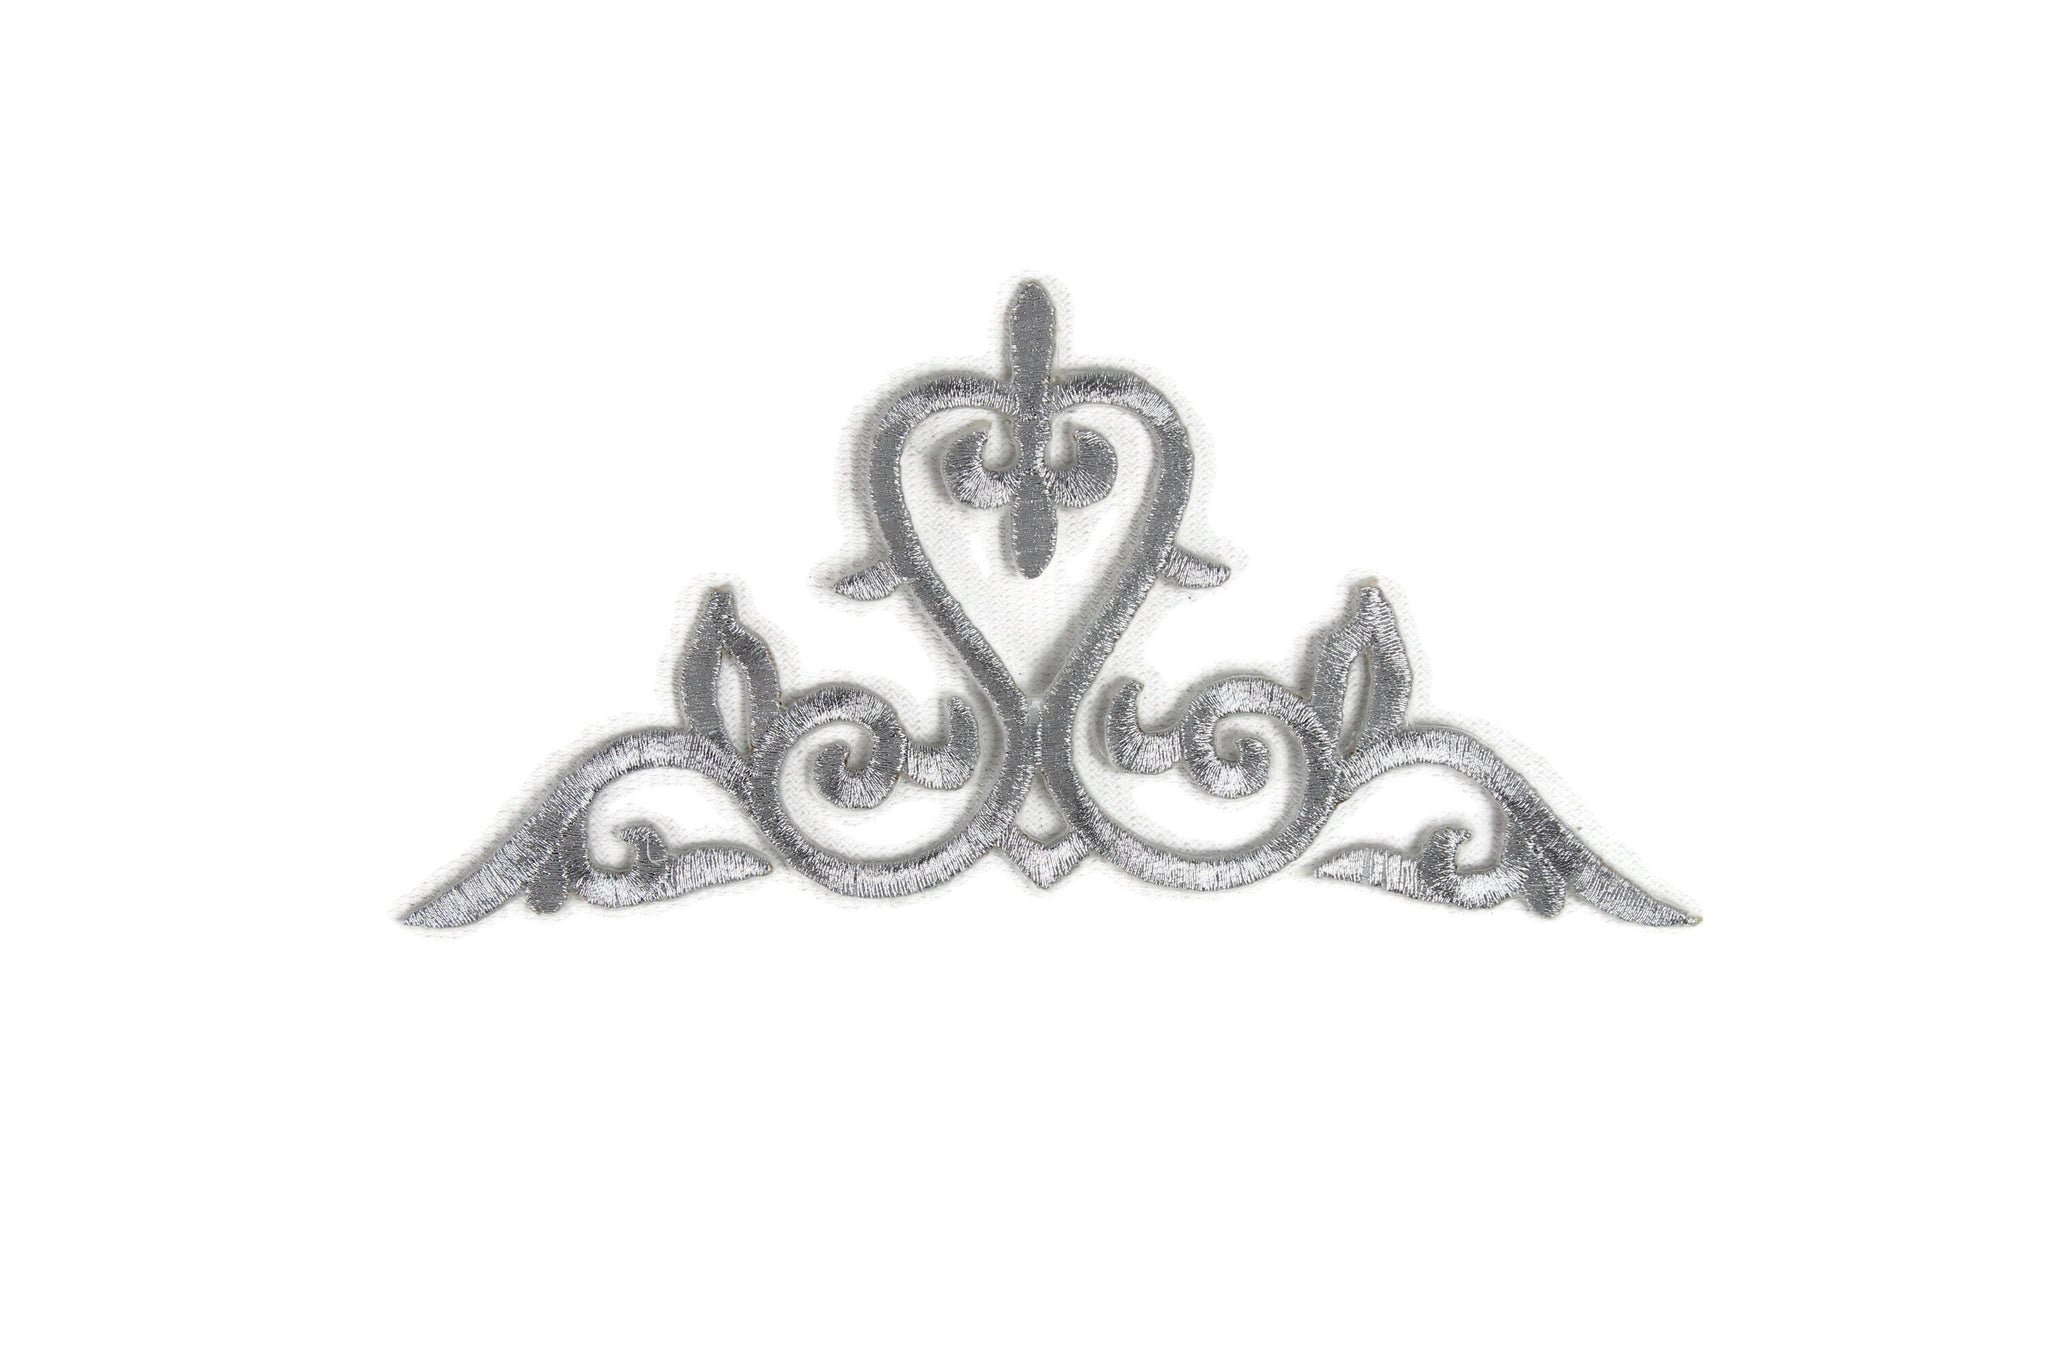 Silver Celtic Patch 2.9x5.7 Inches Iron On Patch Embroidery, Celtic Custom Patch, High Quality Sew On Badge for Denim, Sew On Patch